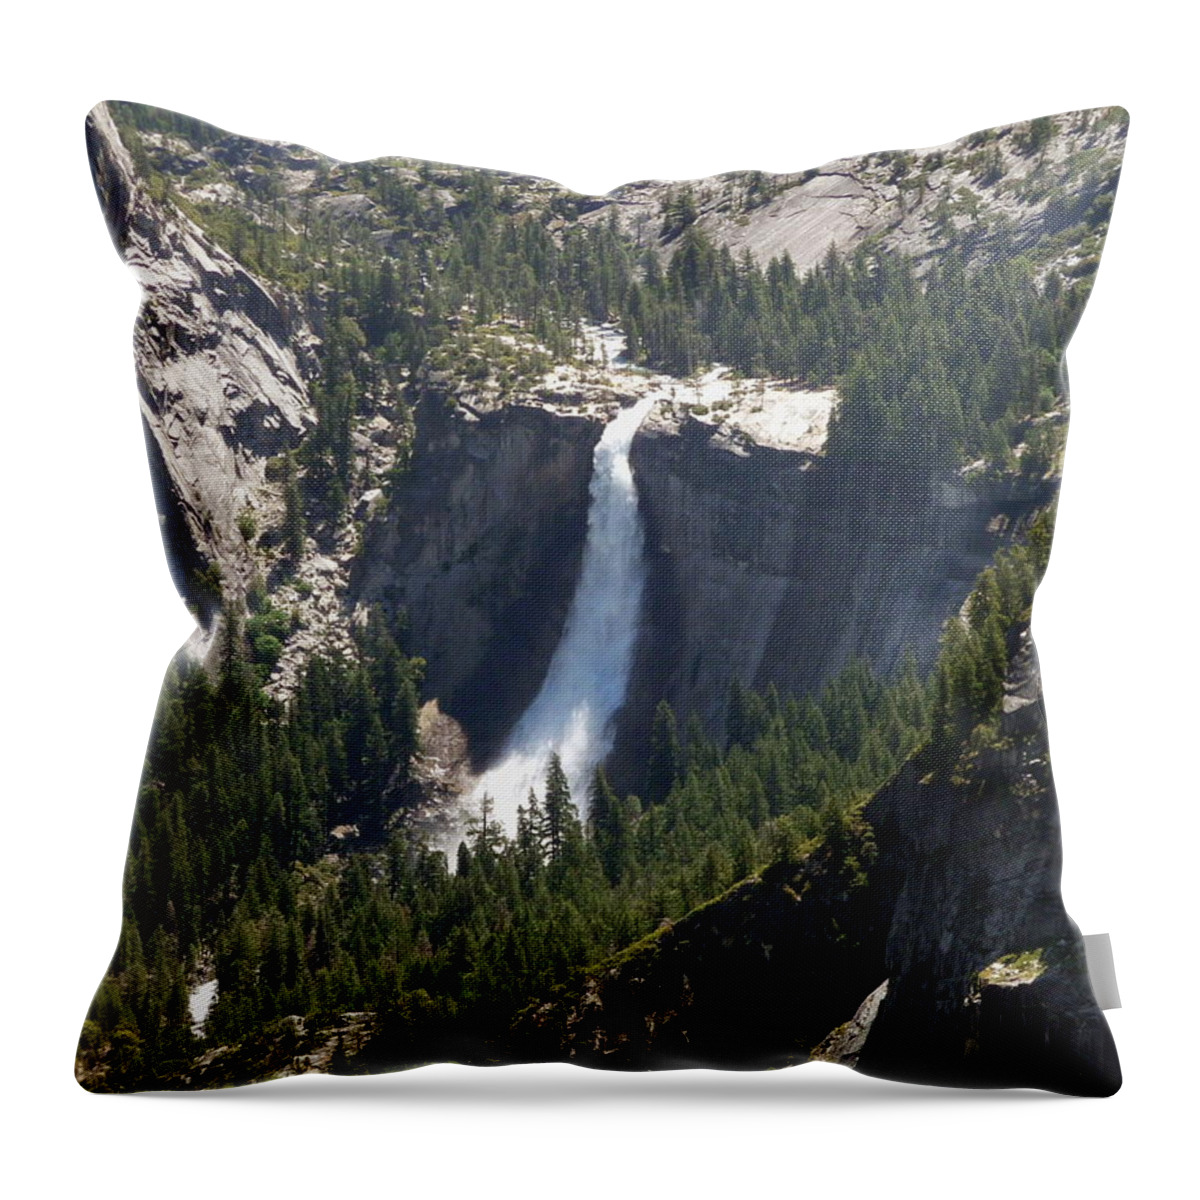 Scenics Throw Pillow featuring the photograph Nevada Fall by Photo By Tim Lawnicki